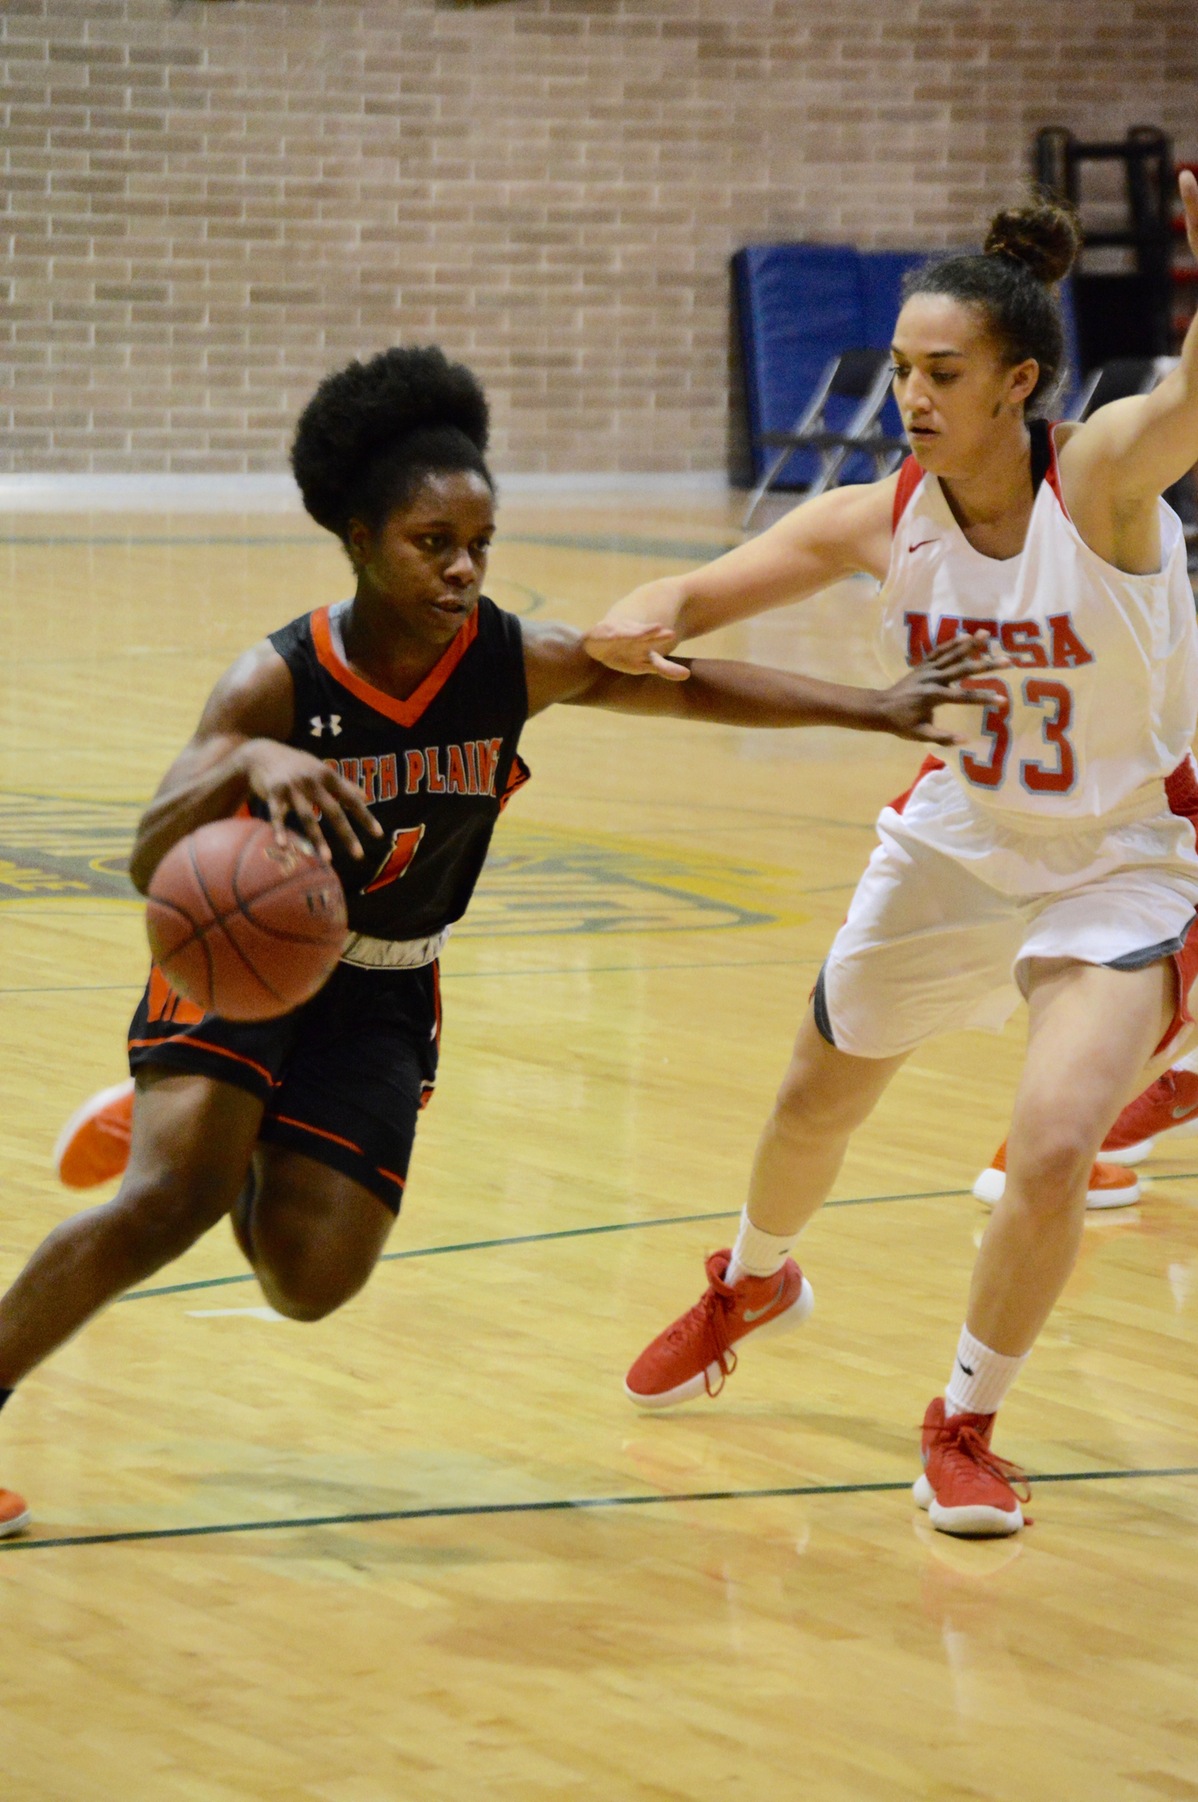 Lady Texans fall to Mesa 74-65 Thursday in Scottsdale